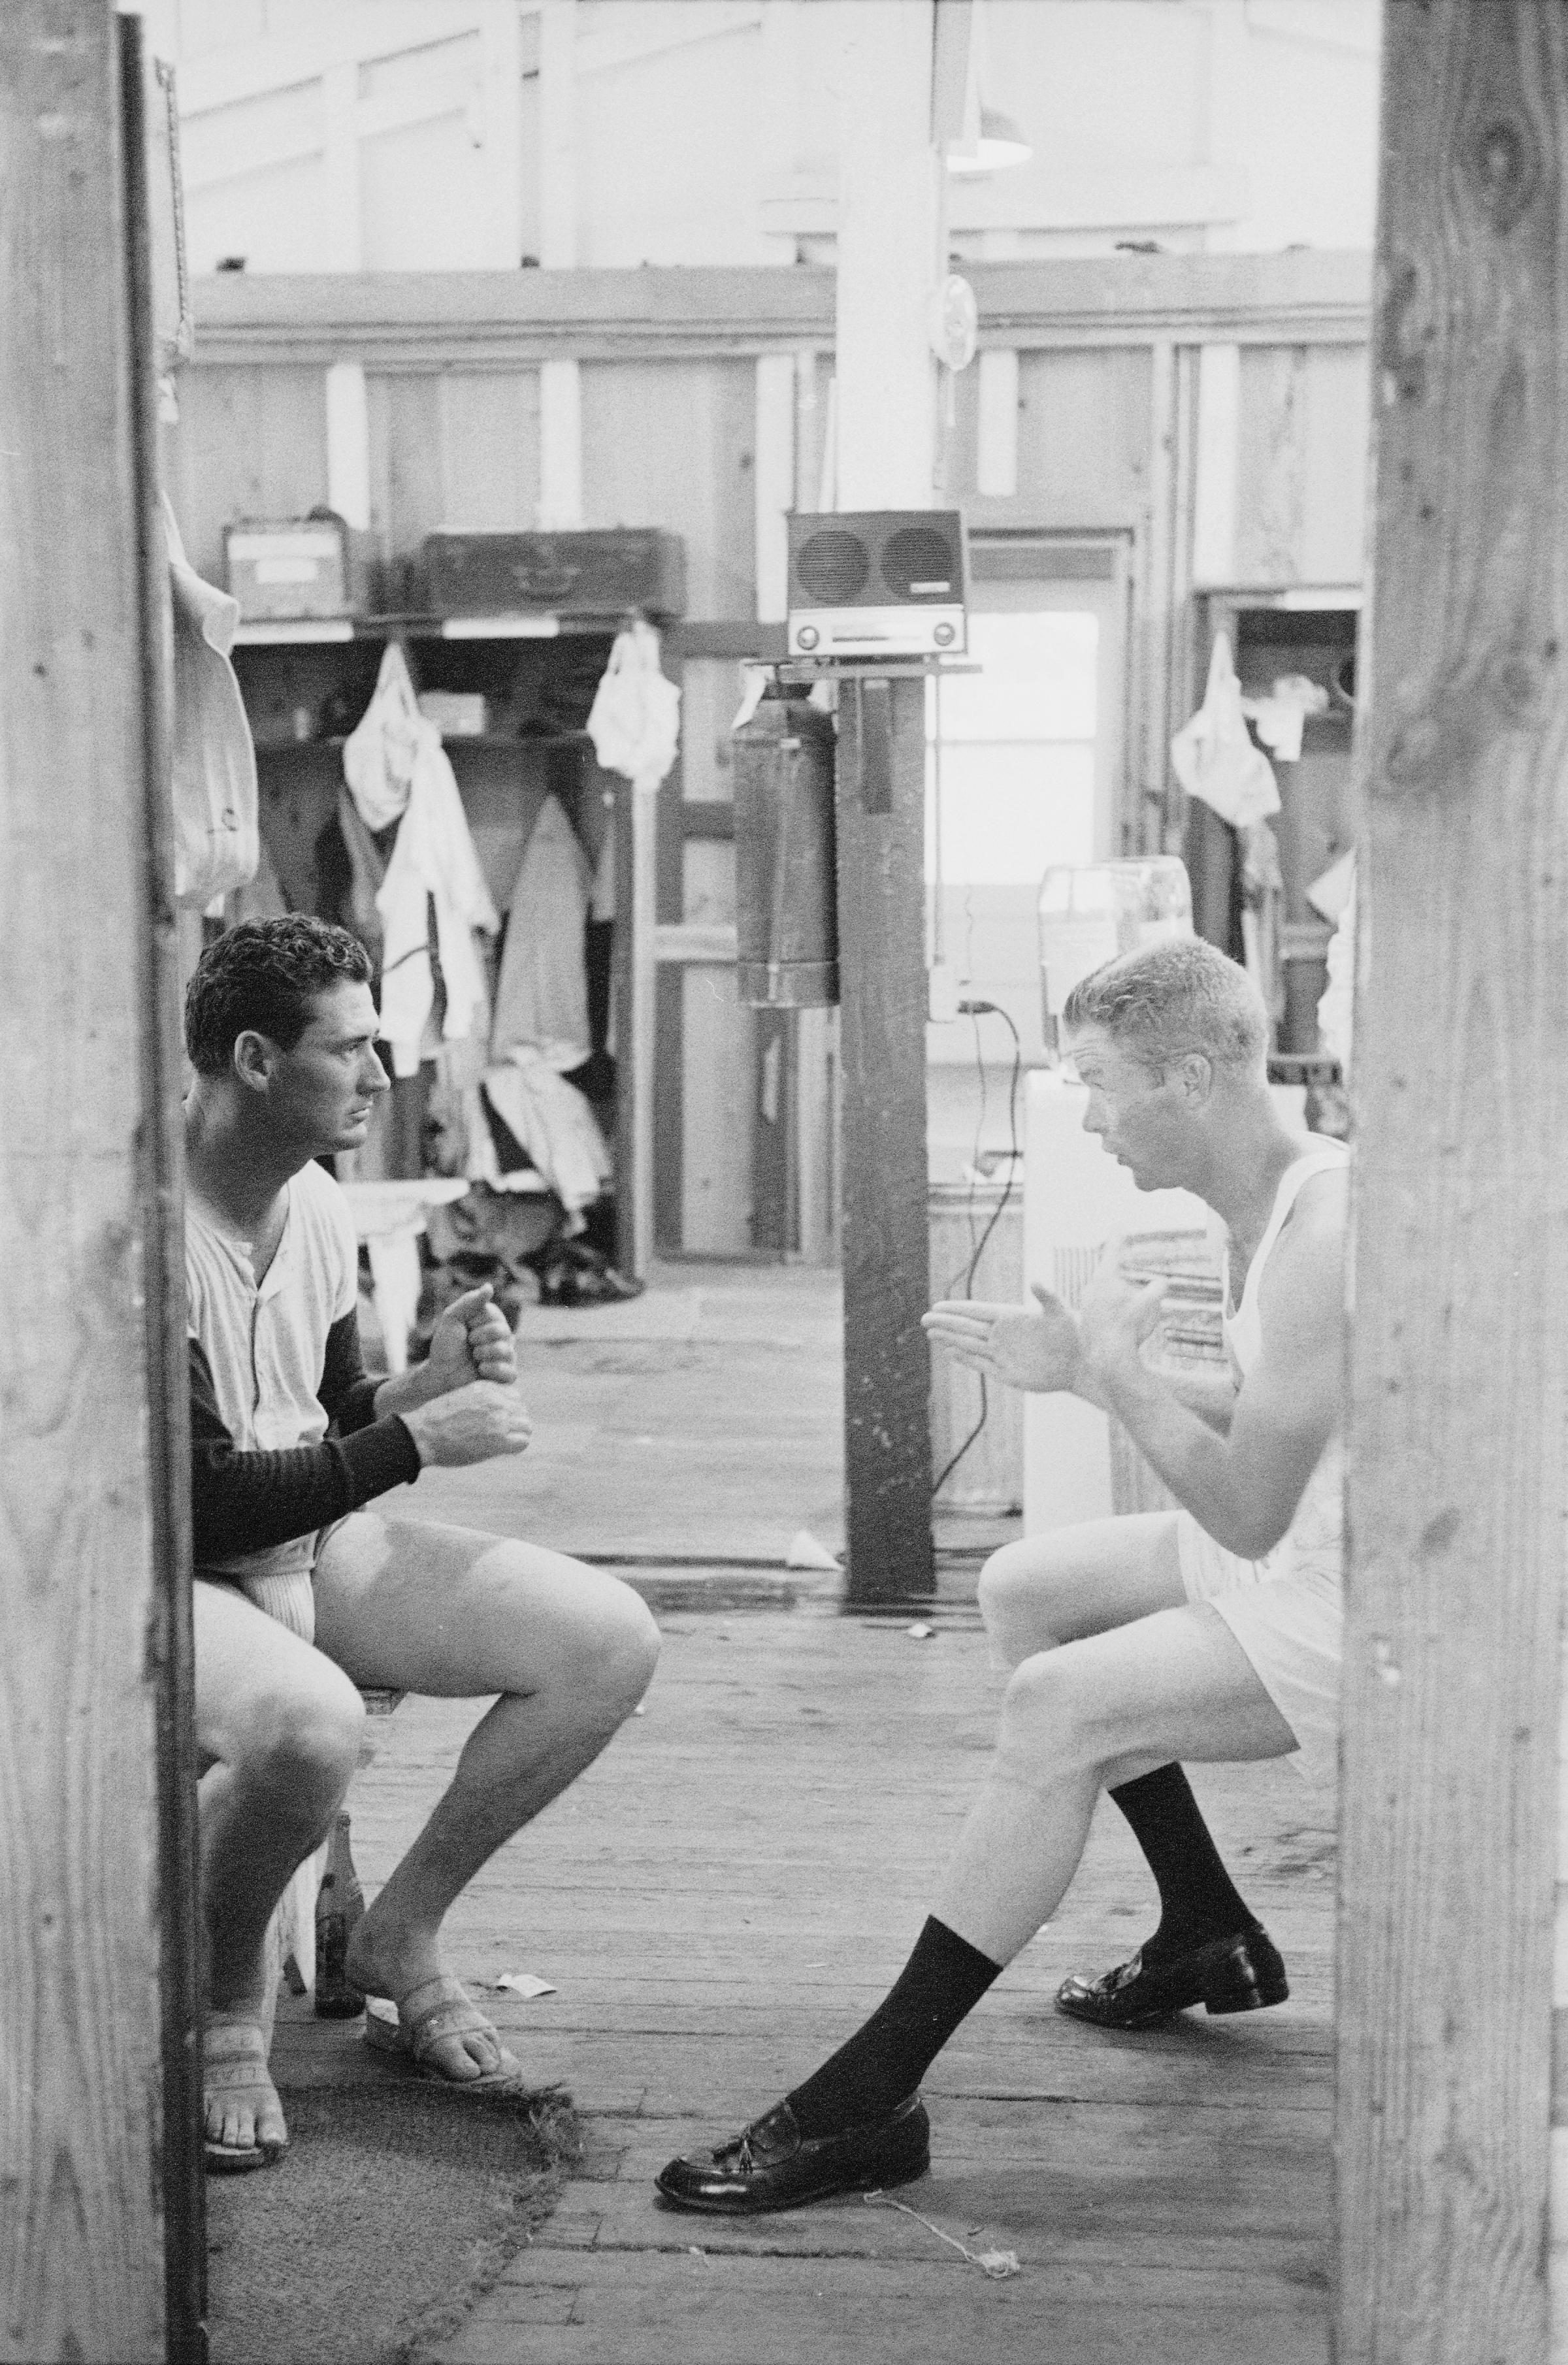 Ted Williams of the Boston Red Sox, left, talks with teammate Gordon Windhorn about batting in the locker room during spring training, Sarasota, Florida, 1956.